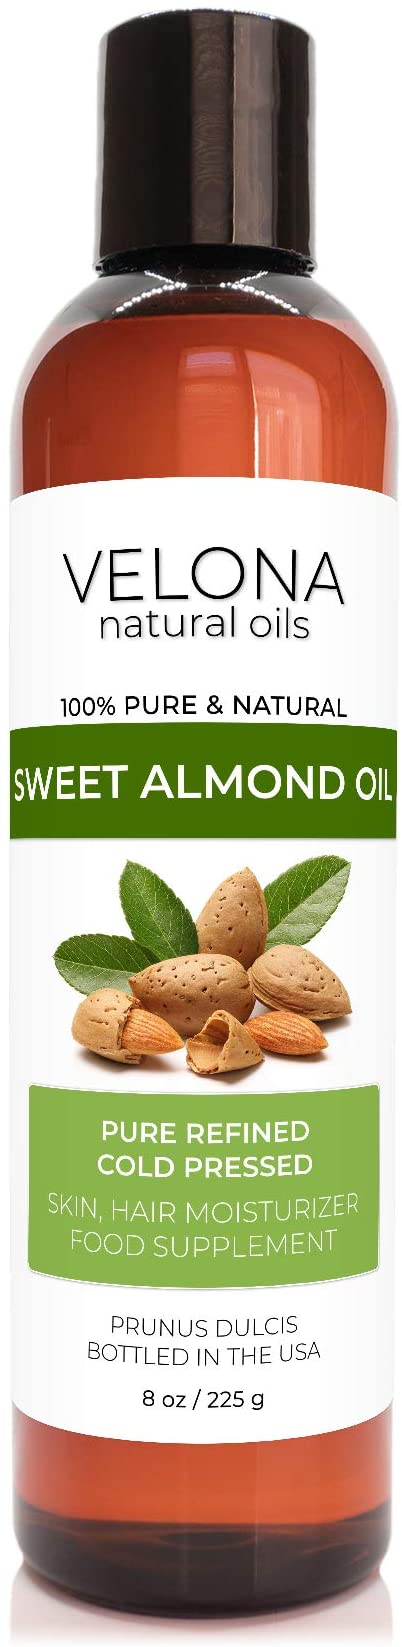 100% Sweet Almond Oil by Velona | All Natural Clear Carrier Oil for Face, Hair, Body and Skin Care | Refined, Cold Pressed | Size: 8 OZ